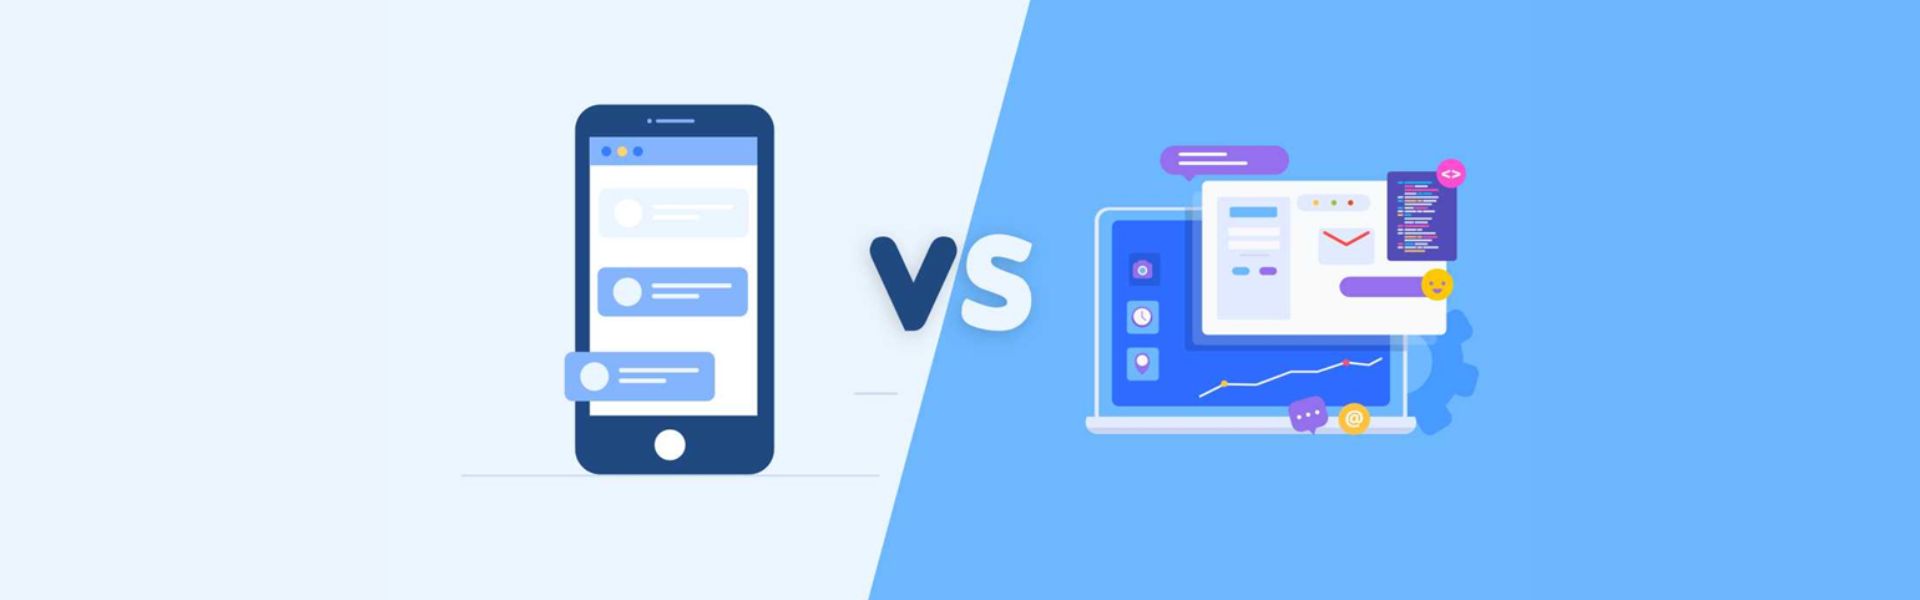 Web Apps vs. Mobile Apps: What’s the Difference?